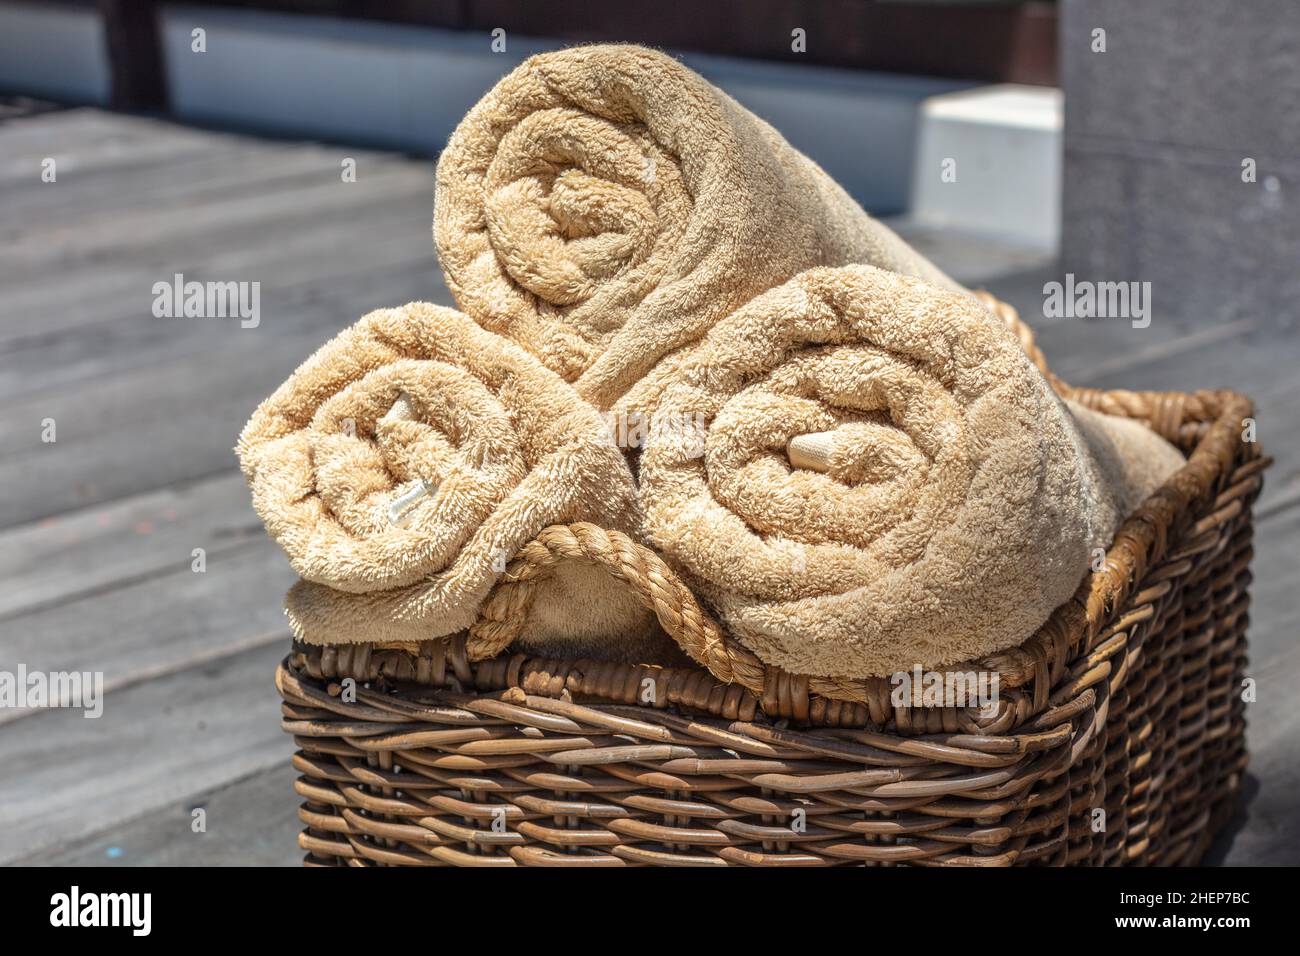 Three rolled beige color towels in a thatched rattan basket. Stock Photo